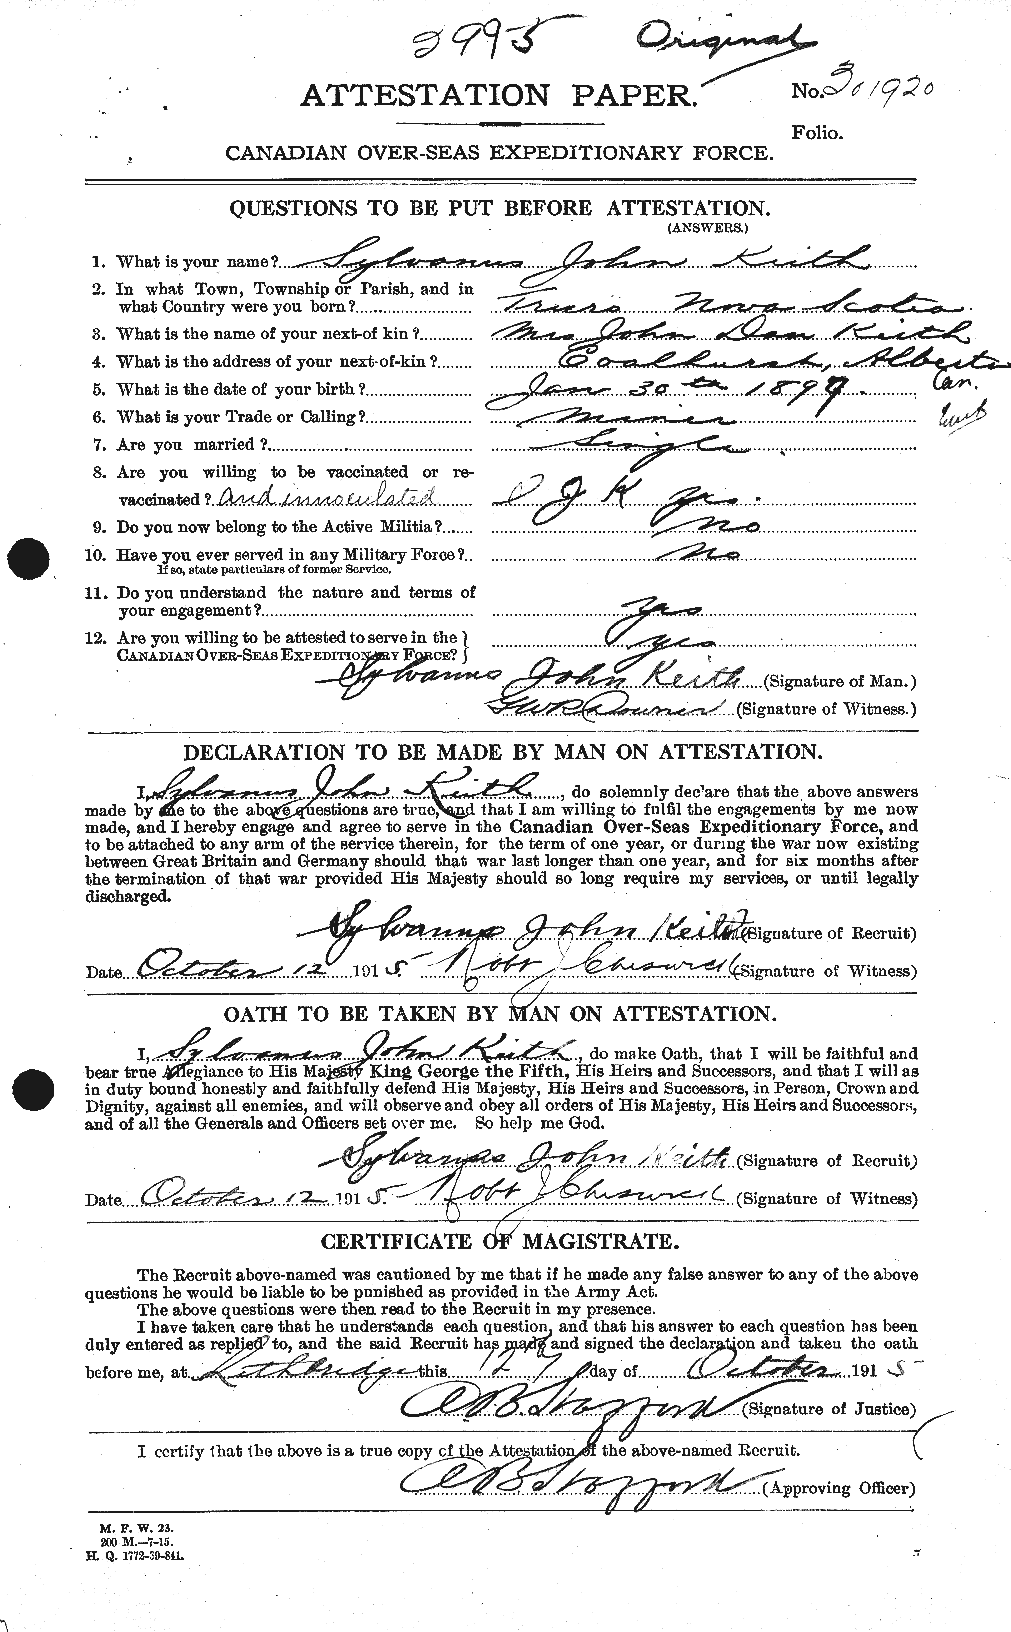 Personnel Records of the First World War - CEF 432505a